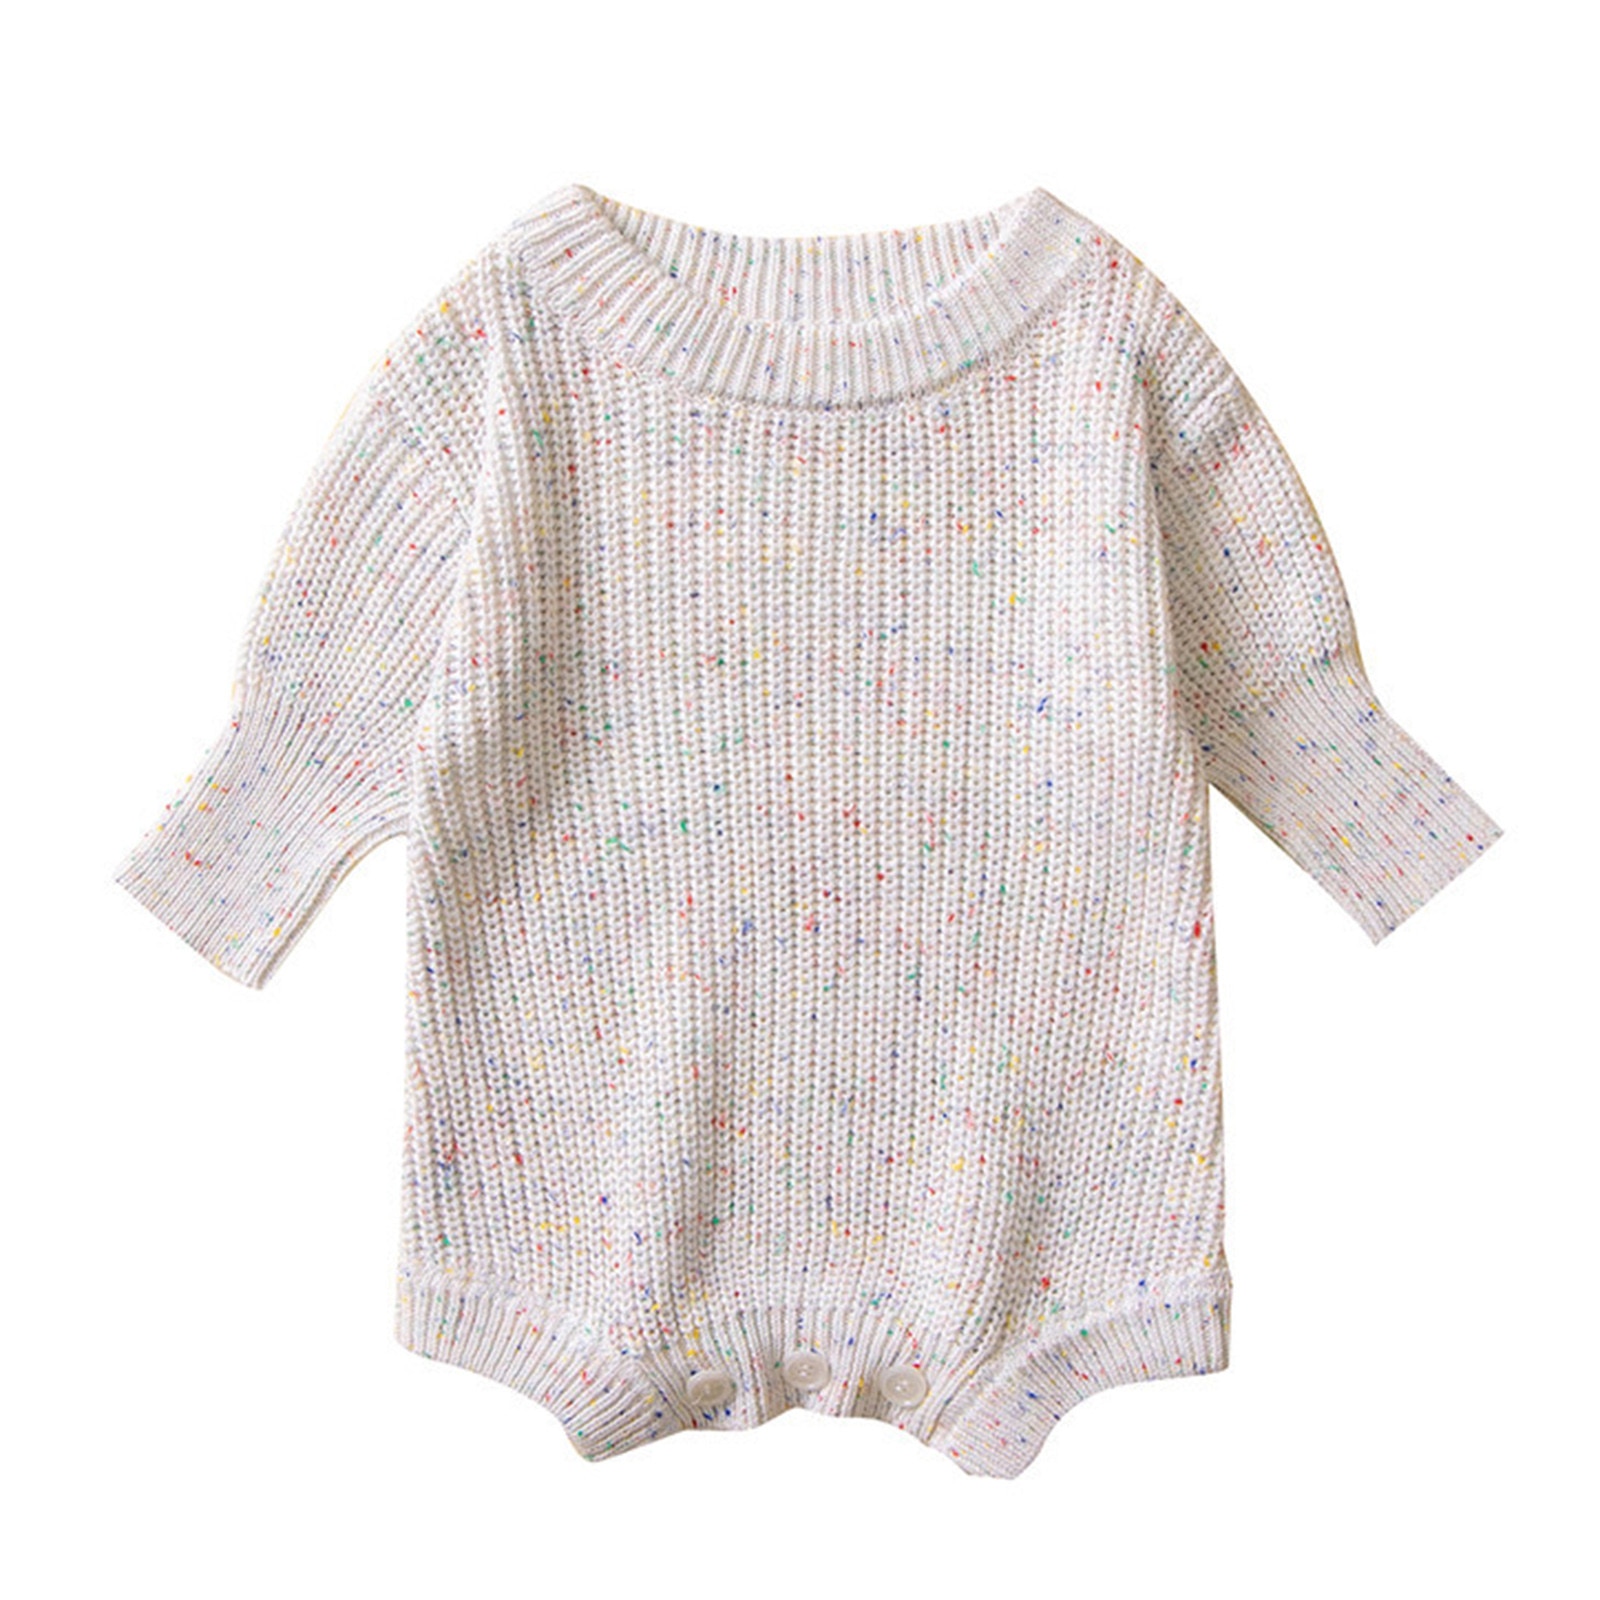 Toddler Infant Girls Long Sleeve Colourful Kintted Sweater Romper Bodysuit For Baby Preemie Clothes Clothes Baby Girl Bodysuit